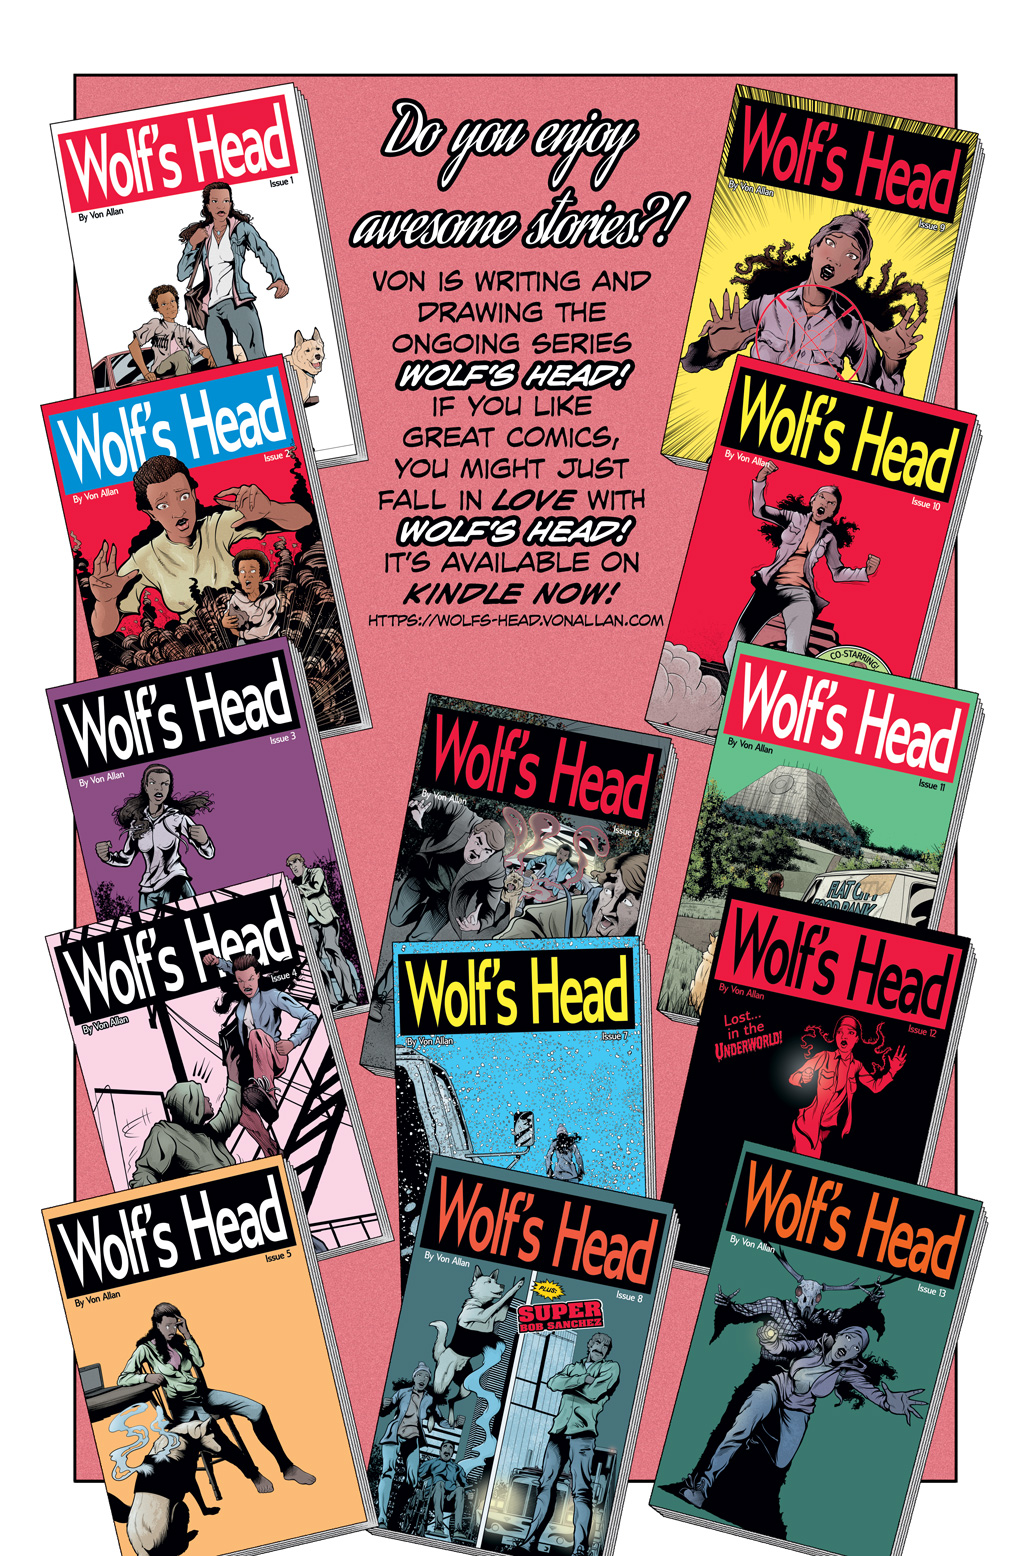 Teaser image for Wolf's Head on Kindle